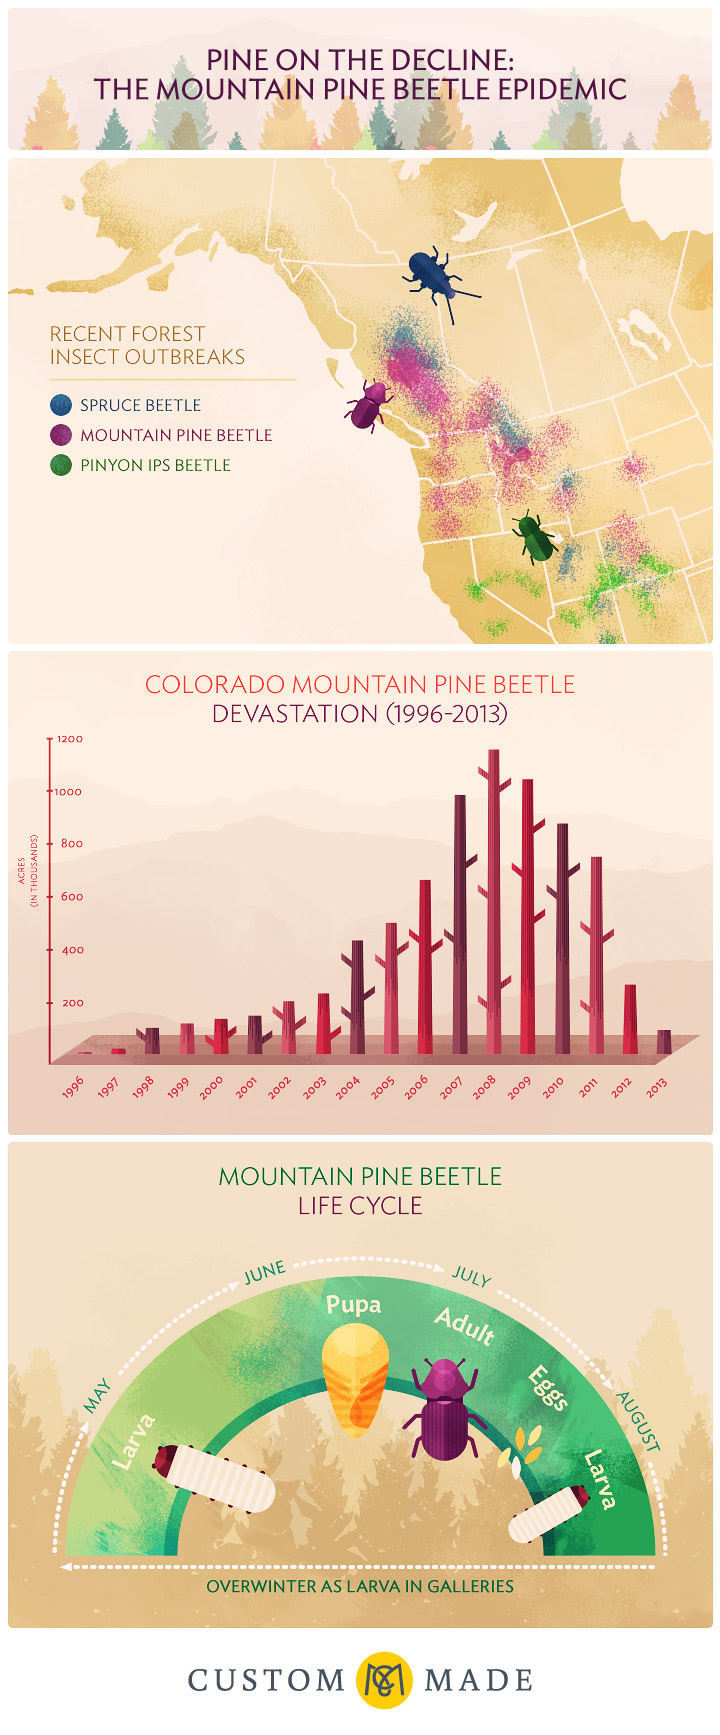 Pine on the Decline: The Mountain Pine Beetle Epidemic